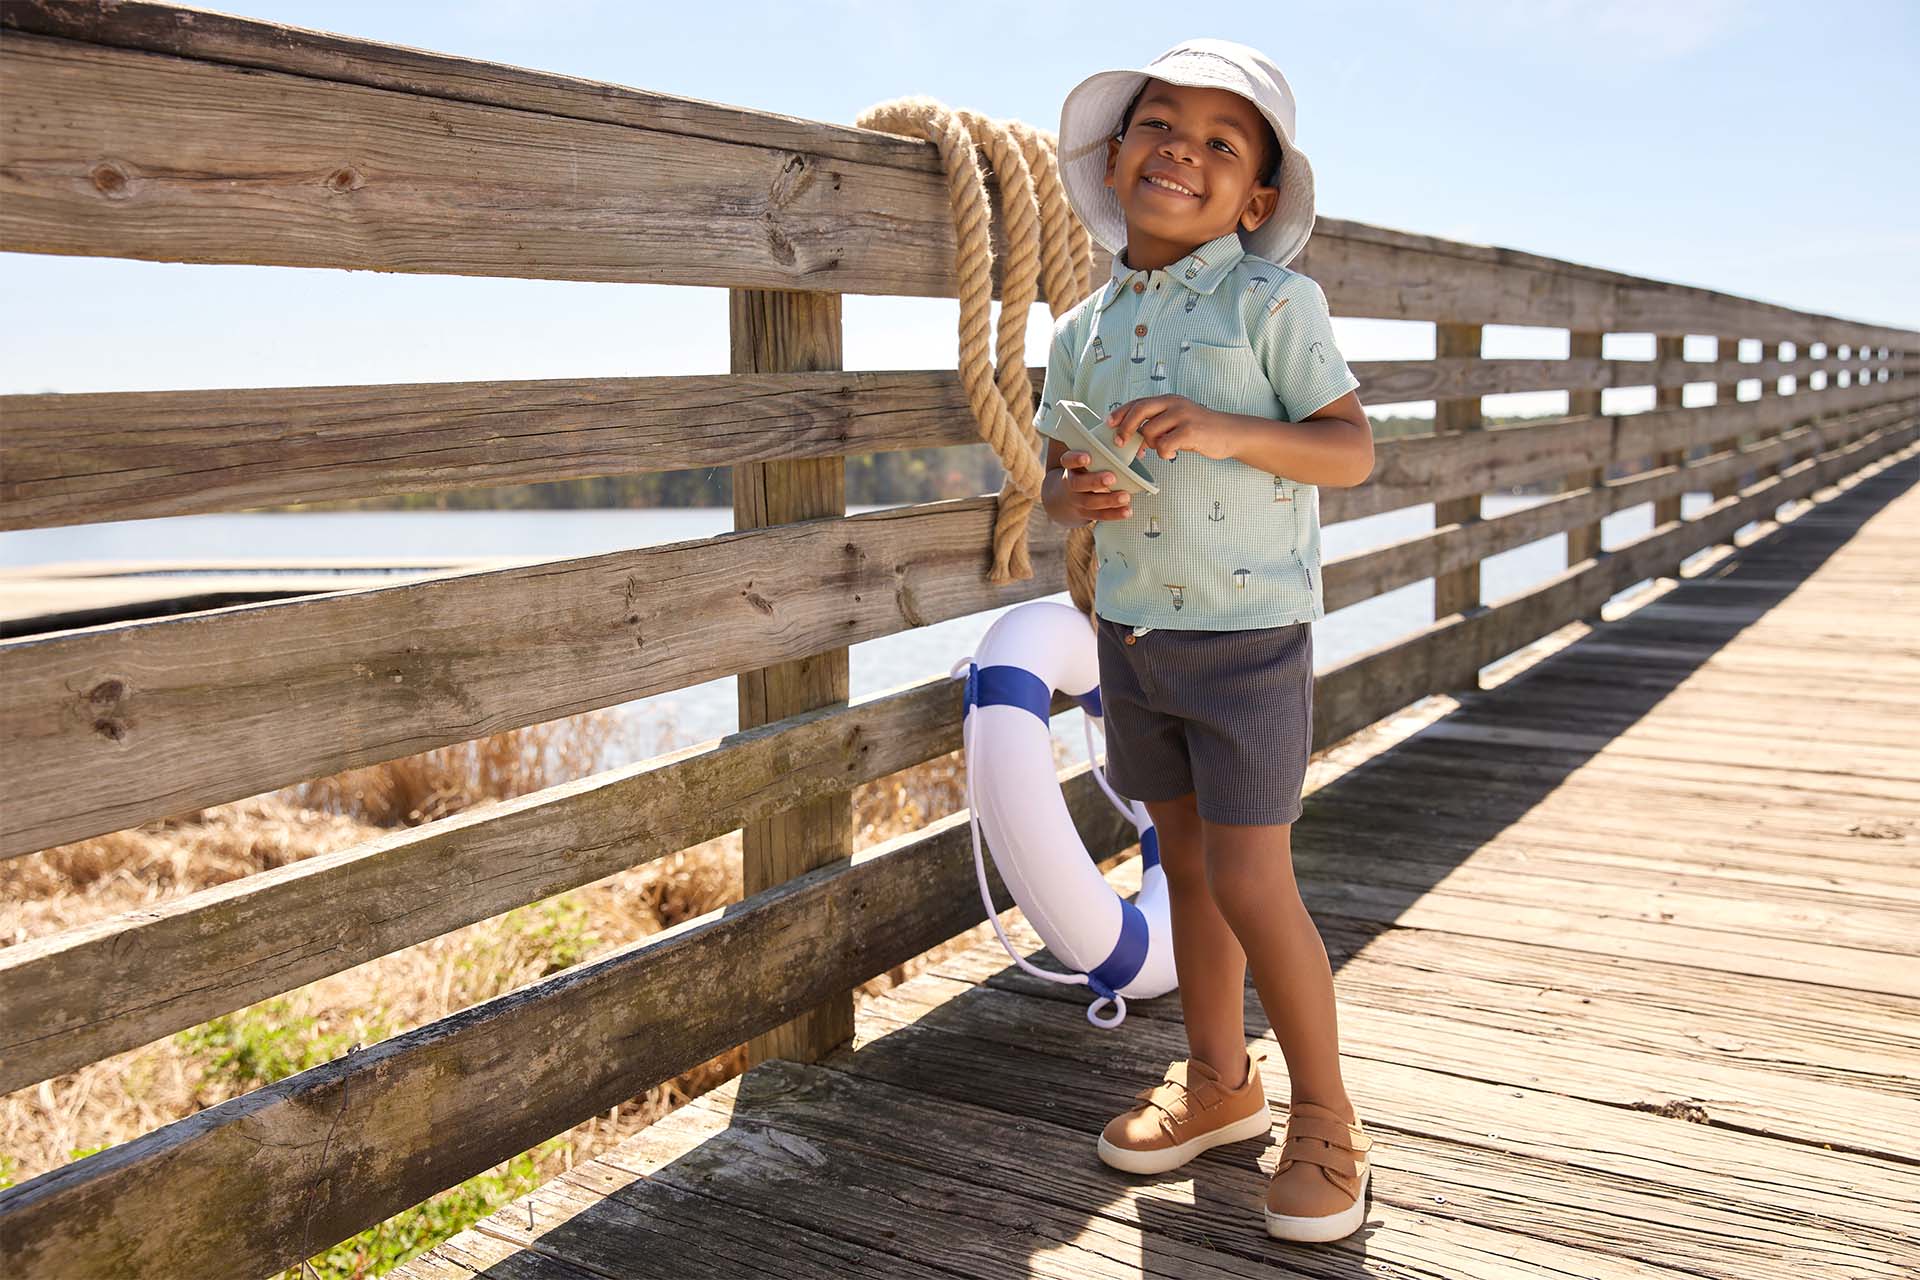 A toddler boy in a blue summer outfit standing on a wooden lakeside pier.